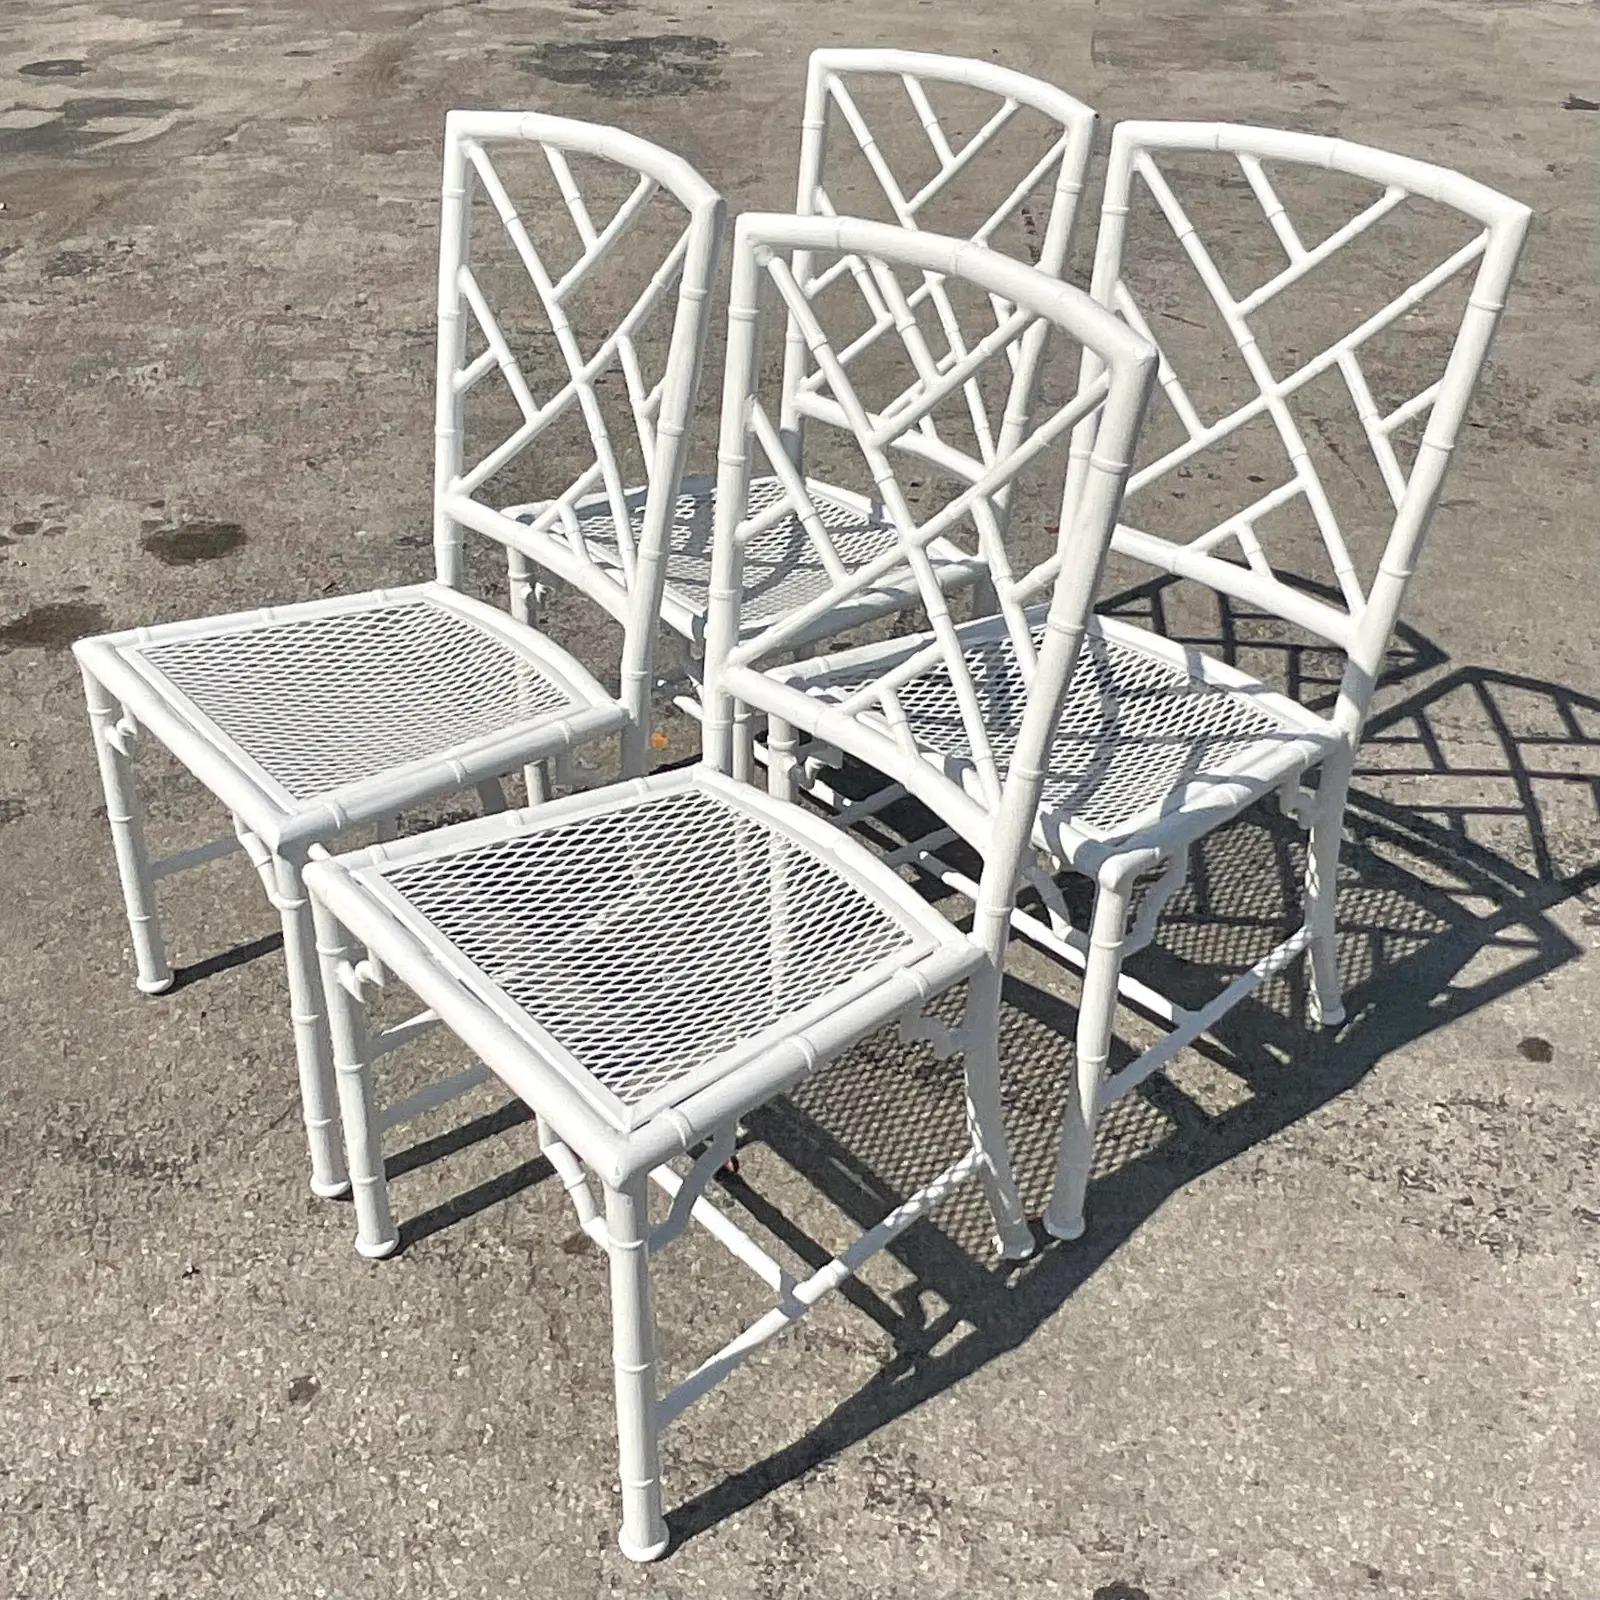 An exceptional vintage Coastal outdoor dining set. A set of four Chinese Chippendale chairs and matching pedestal. No glass. Done in a cast aluminum. Freshly powder coasted in a high gloss white. Acquired from a Palm Beach estate.

Pedestal